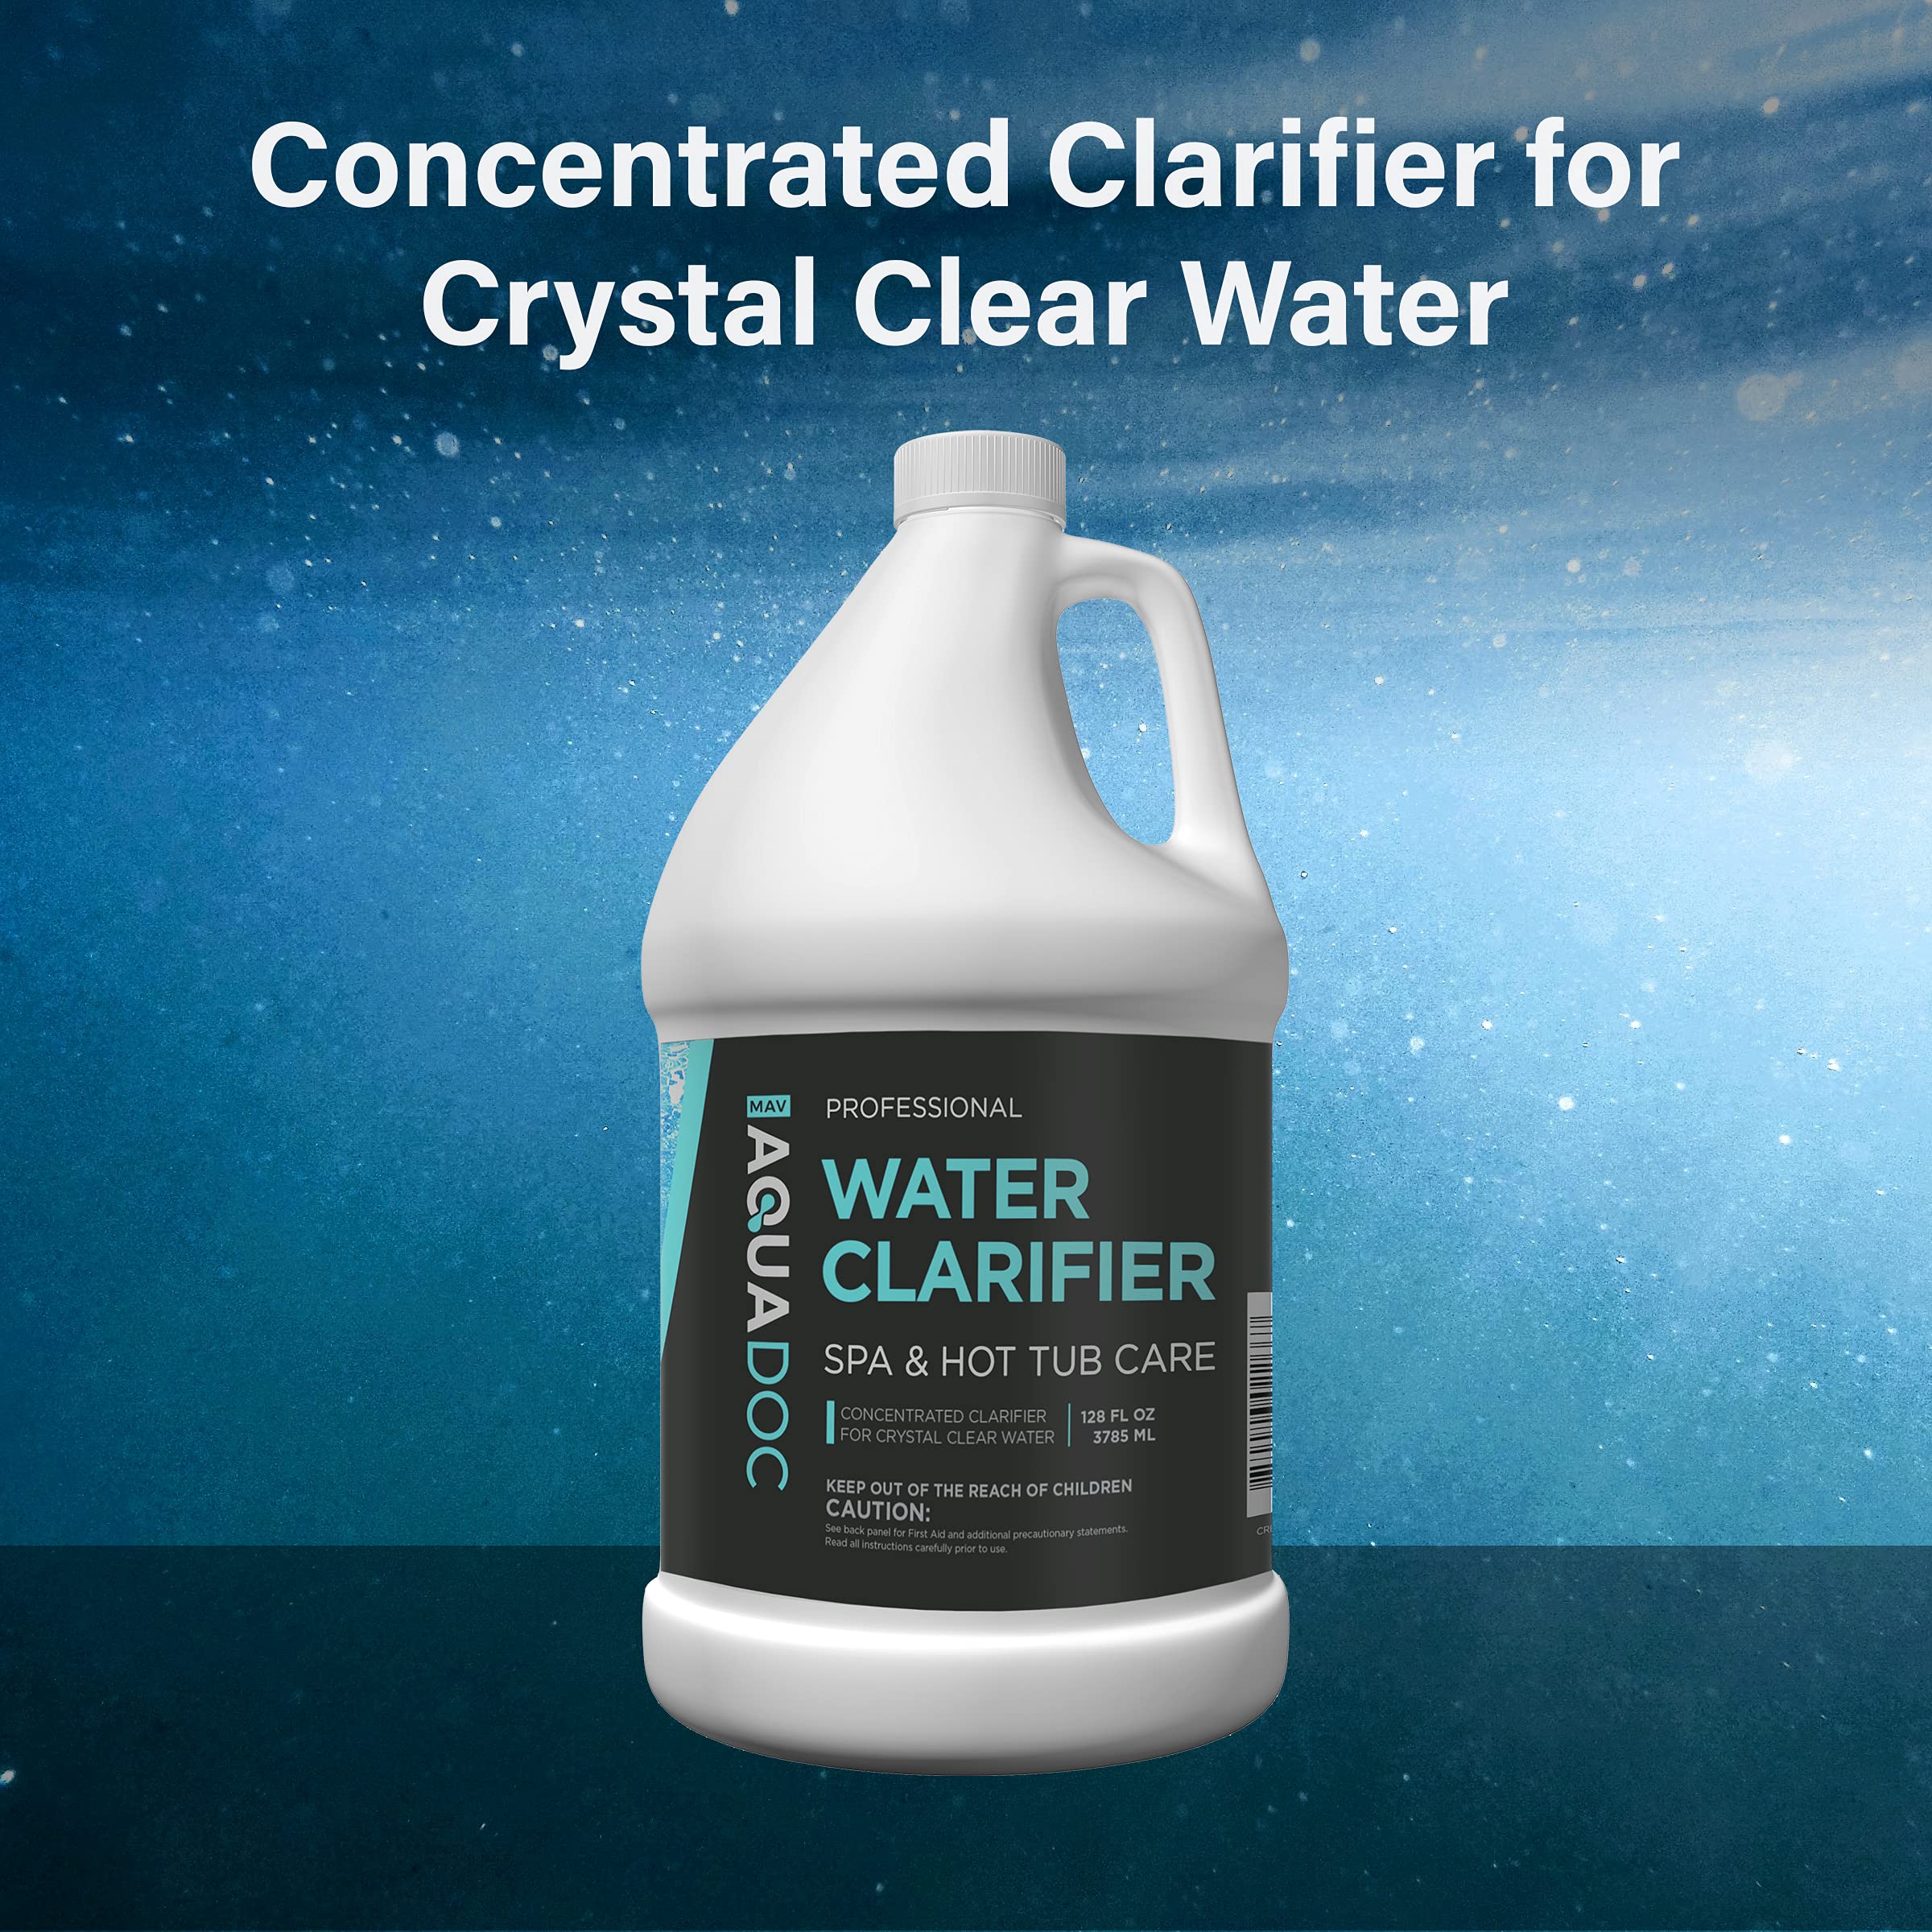 MAV AquaDoc Spa Clarifier & Hot Tub Clarifier for Fast Acting Cloudy Water Treatment, The Spa Clarifier Hot Tub Owners Love, Use Our Hot Tub Water Clarifier to Keep Your Spa Clear & Balanced - 1 Gal